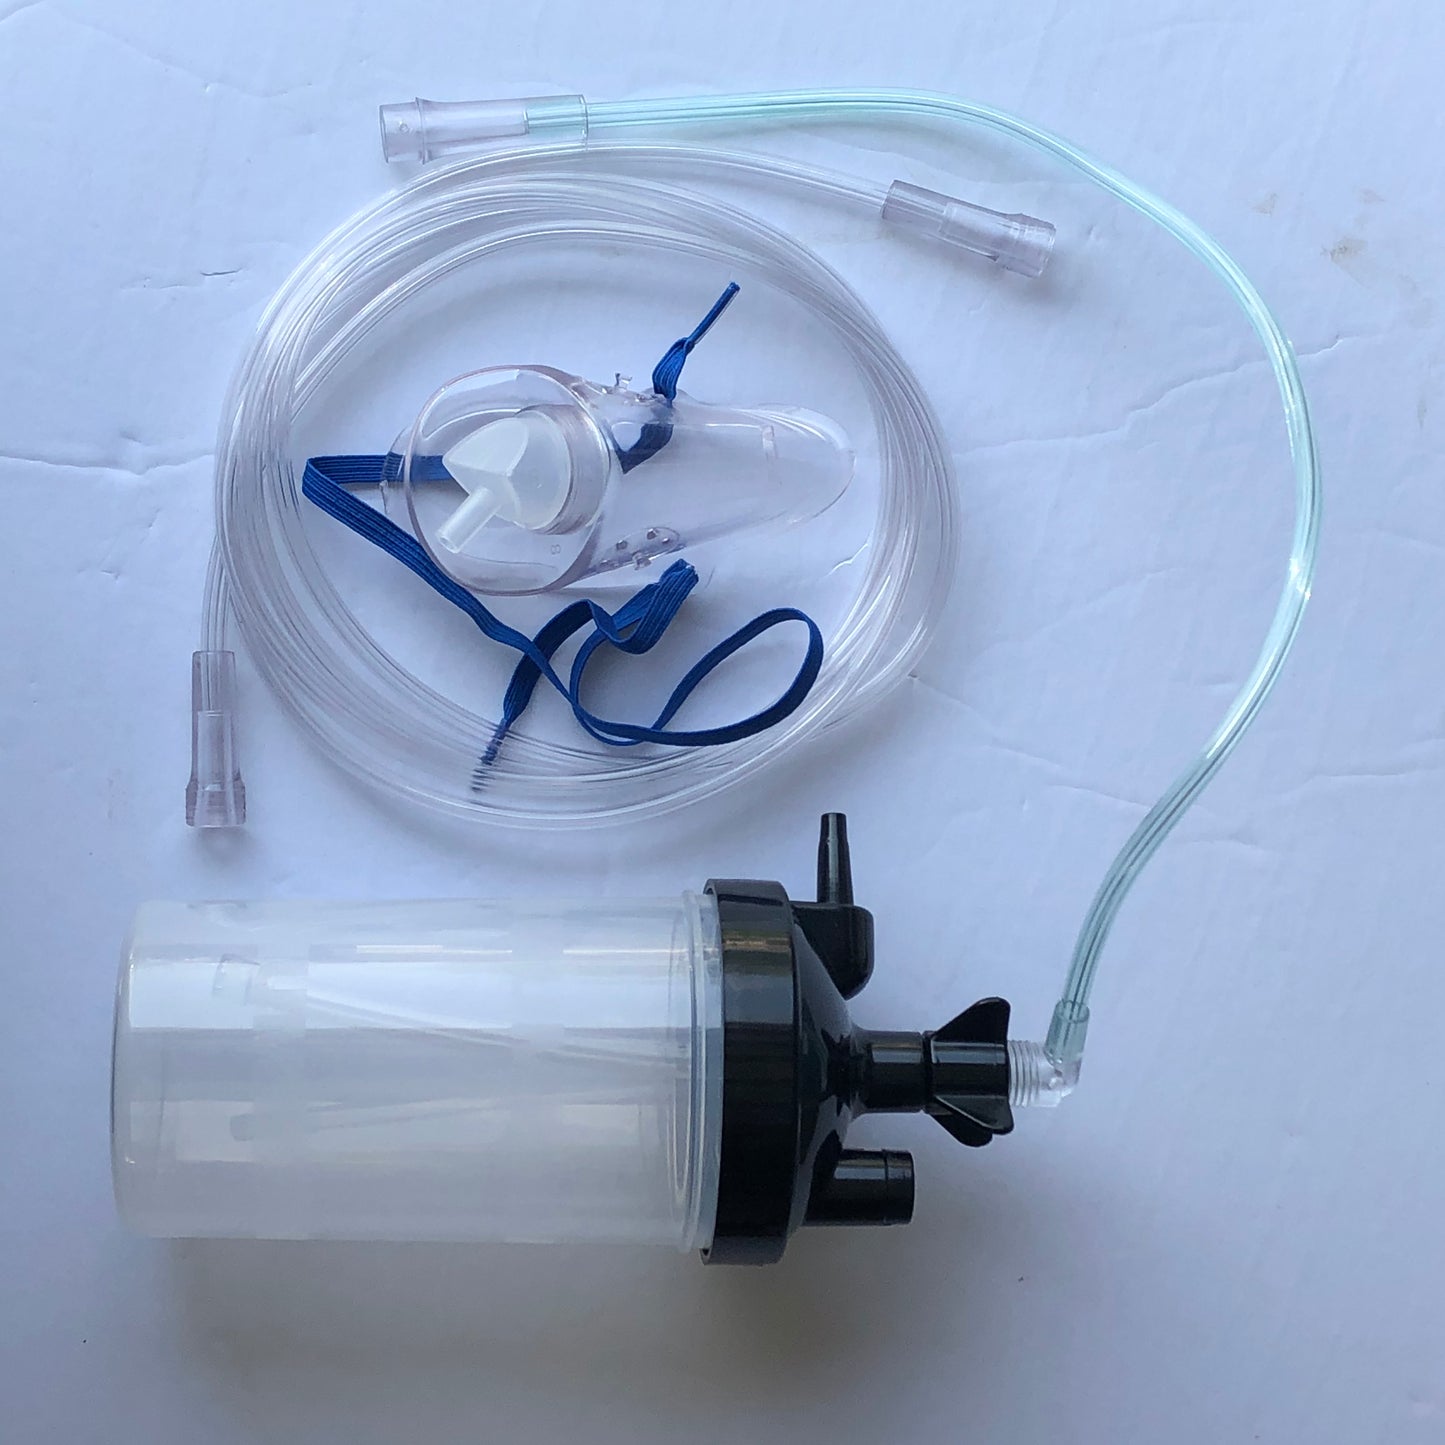 NEW OXYGEN HUMIDIFIER BOTTLE KIT WITH 17" ELBOW HOSE AND  MASK WITH 7' HOSE